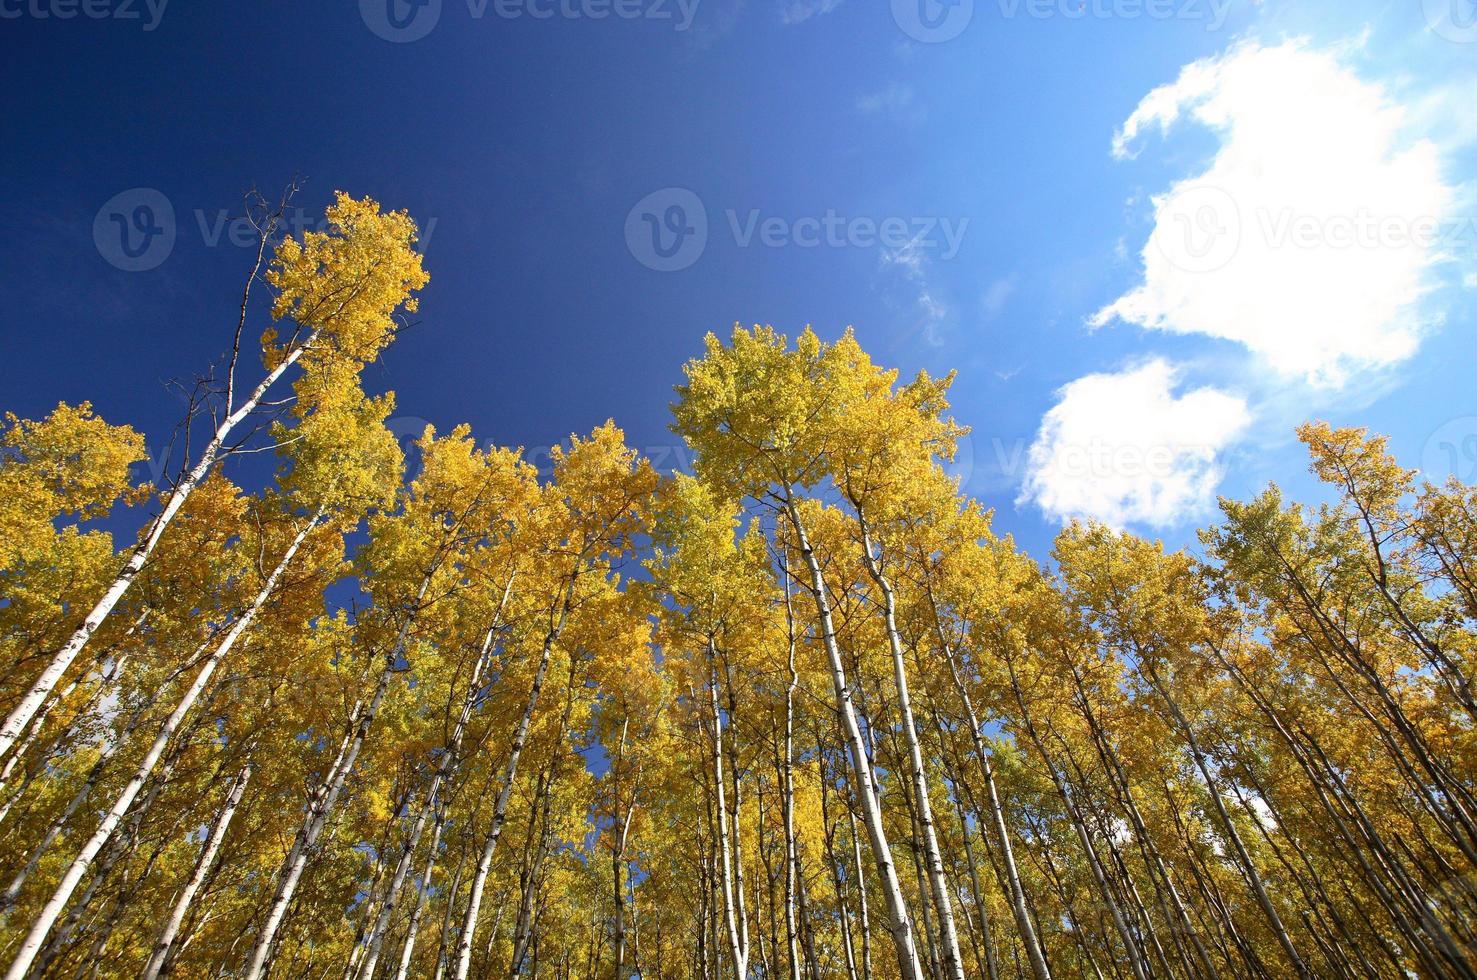 Looking up through Aspen trees in fall photo